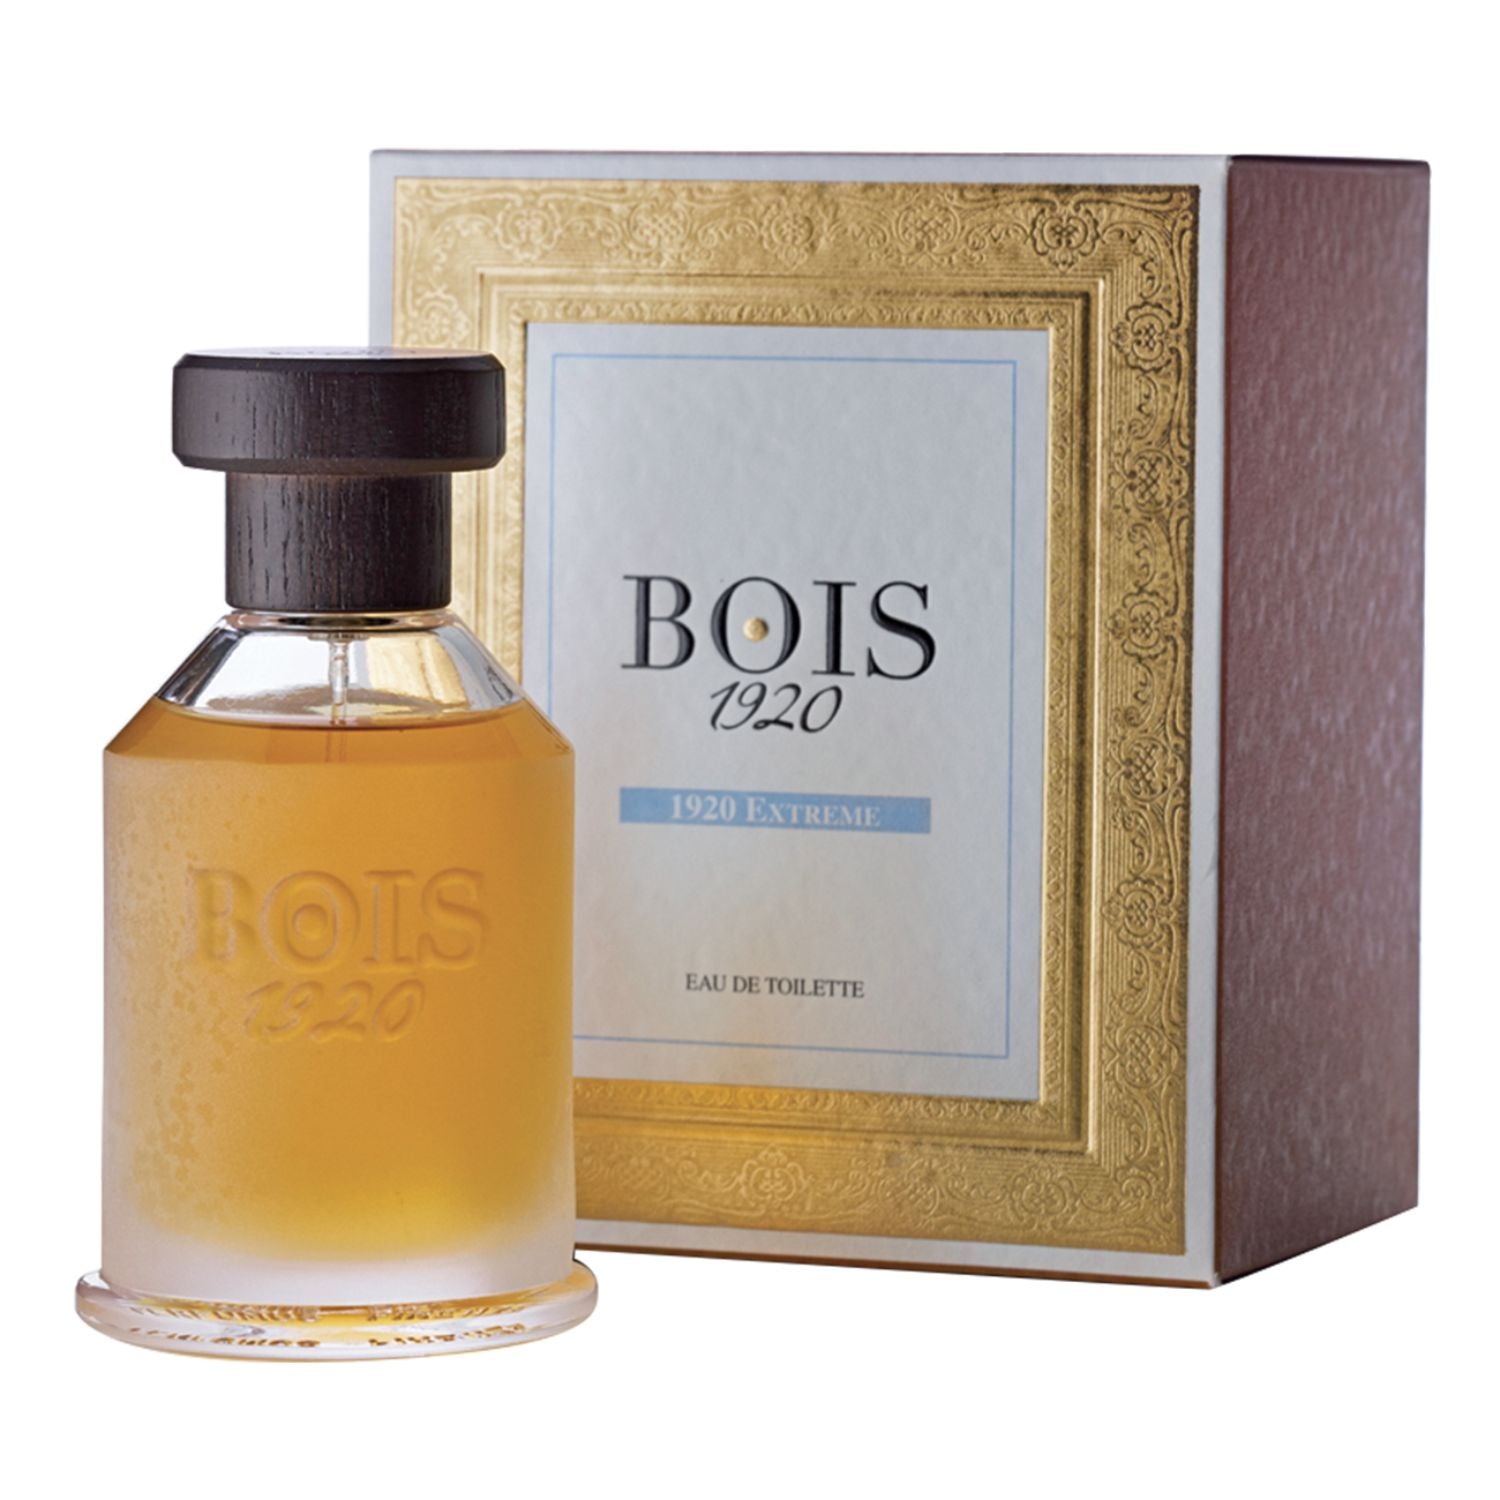 Bois 1920 – Extreme, A Woody Fragrance For Women And Menwith This Chypre And Spicy Scent You Will Unfold A Long Adventure Of Charm And Seductiona Strong Herbal Blend Of Fresh Bergamot And Lavender Followed By A Sensual Heart Of Jasmine And Geraniumthe Innovative And Intense Fragrance Ends With A Dark Base Of Cedar, Sandalwood And Tonka Beanextreme, A Treat For Your SoulTop Notes: Sage, Lavender And Bergamot; Heart Notes: Geranium And Jasmine; Base Notes: Sandalwood, Cedar, Tonka Bean And Vanilla.